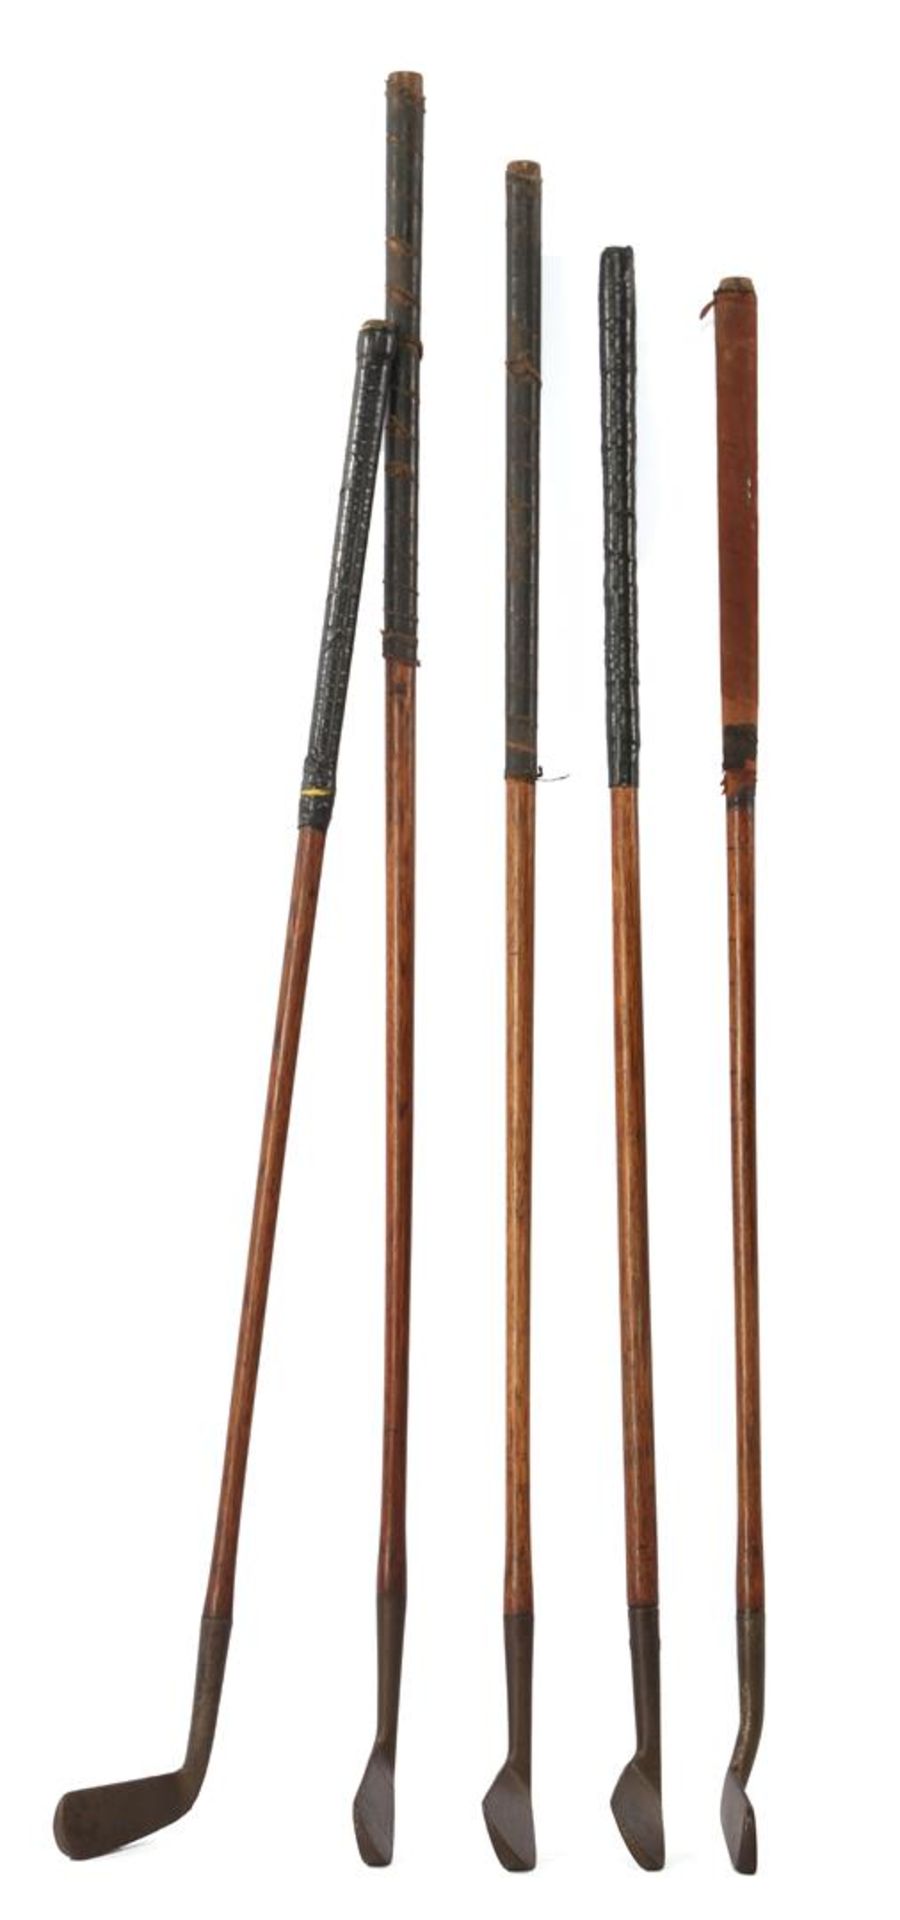 5 iron golf clubs with wooden handle